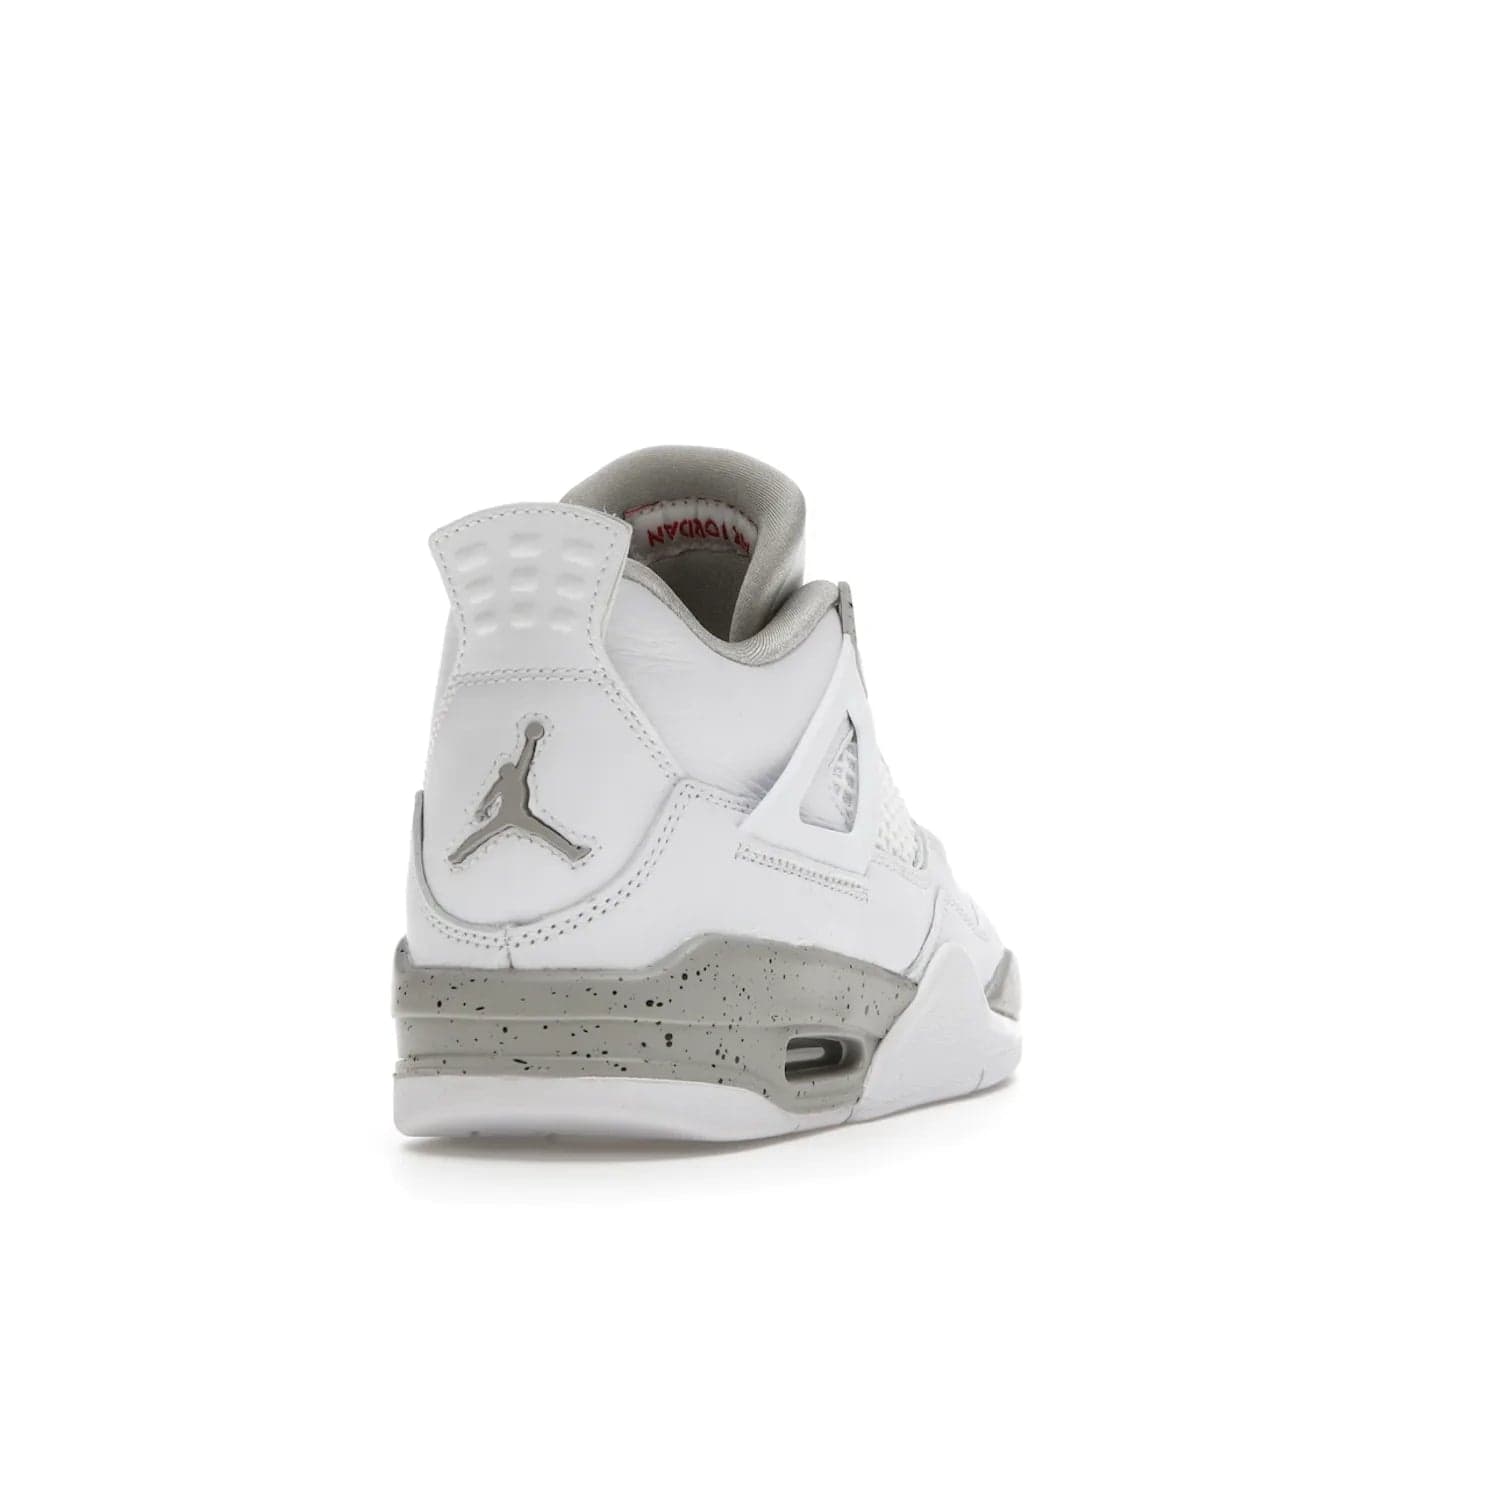 Jordan 4 Retro White Oreo (2021) (GS) - Image 30 - Only at www.BallersClubKickz.com - White Oreo Air Jordan 4 Retro 2021 GS - Iconic sneaker silhouette with white canvas upper, Tech Grey detailing, and Fire Red accents. Available July 2021.